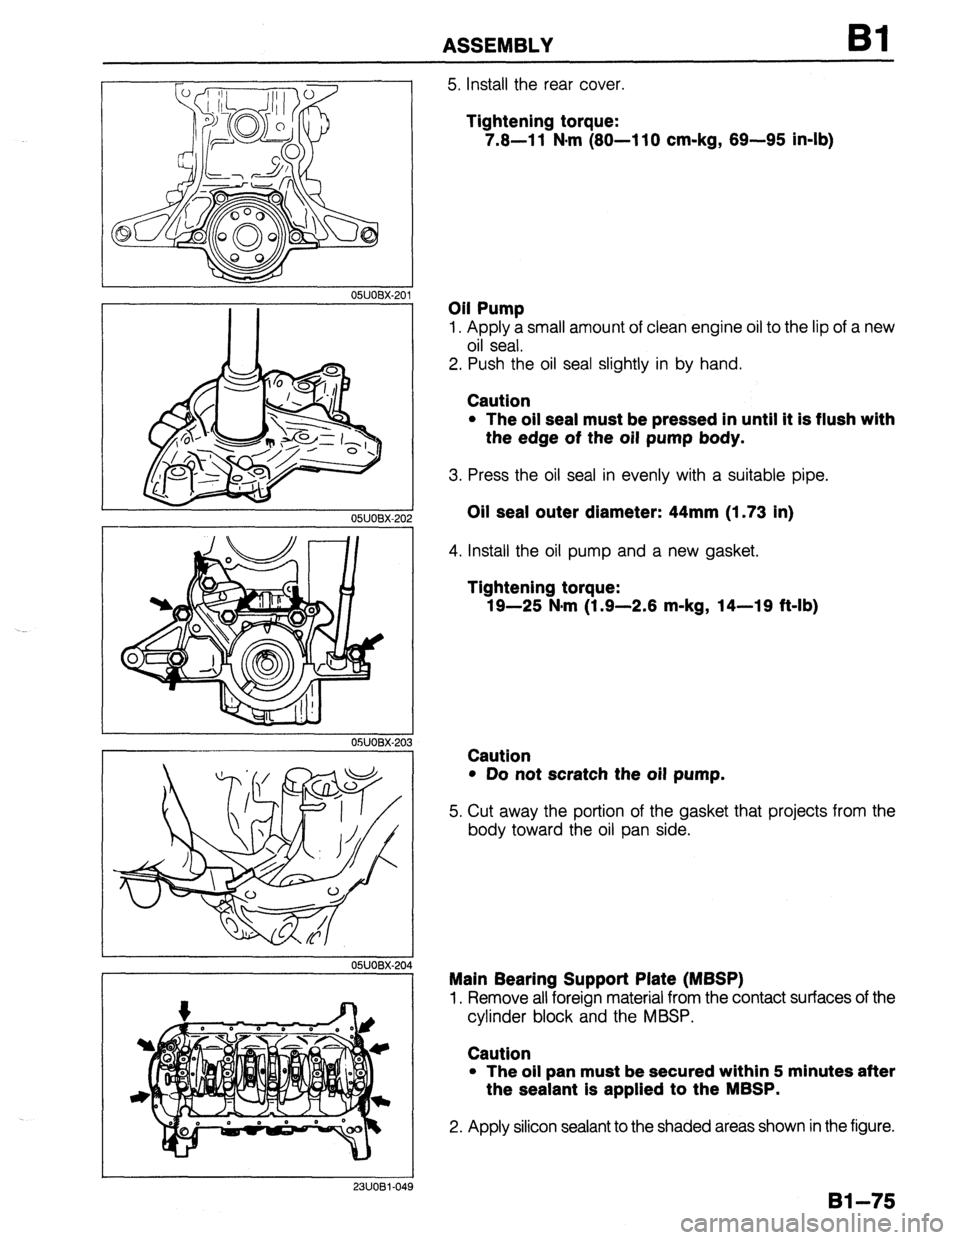 MAZDA PROTEGE 1992  Workshop Manual ASSEMBLY Bl 
OWOBX-20 
23UOBl-049 
5. Install the rear cover. 
Tightening torque: 
7.8-l 1 N*m (80-l 10 cm-kg, 89-95 in-lb) 
Oil Pump 
1. Apply a small amount of clean engine oil to the lip of a new 
